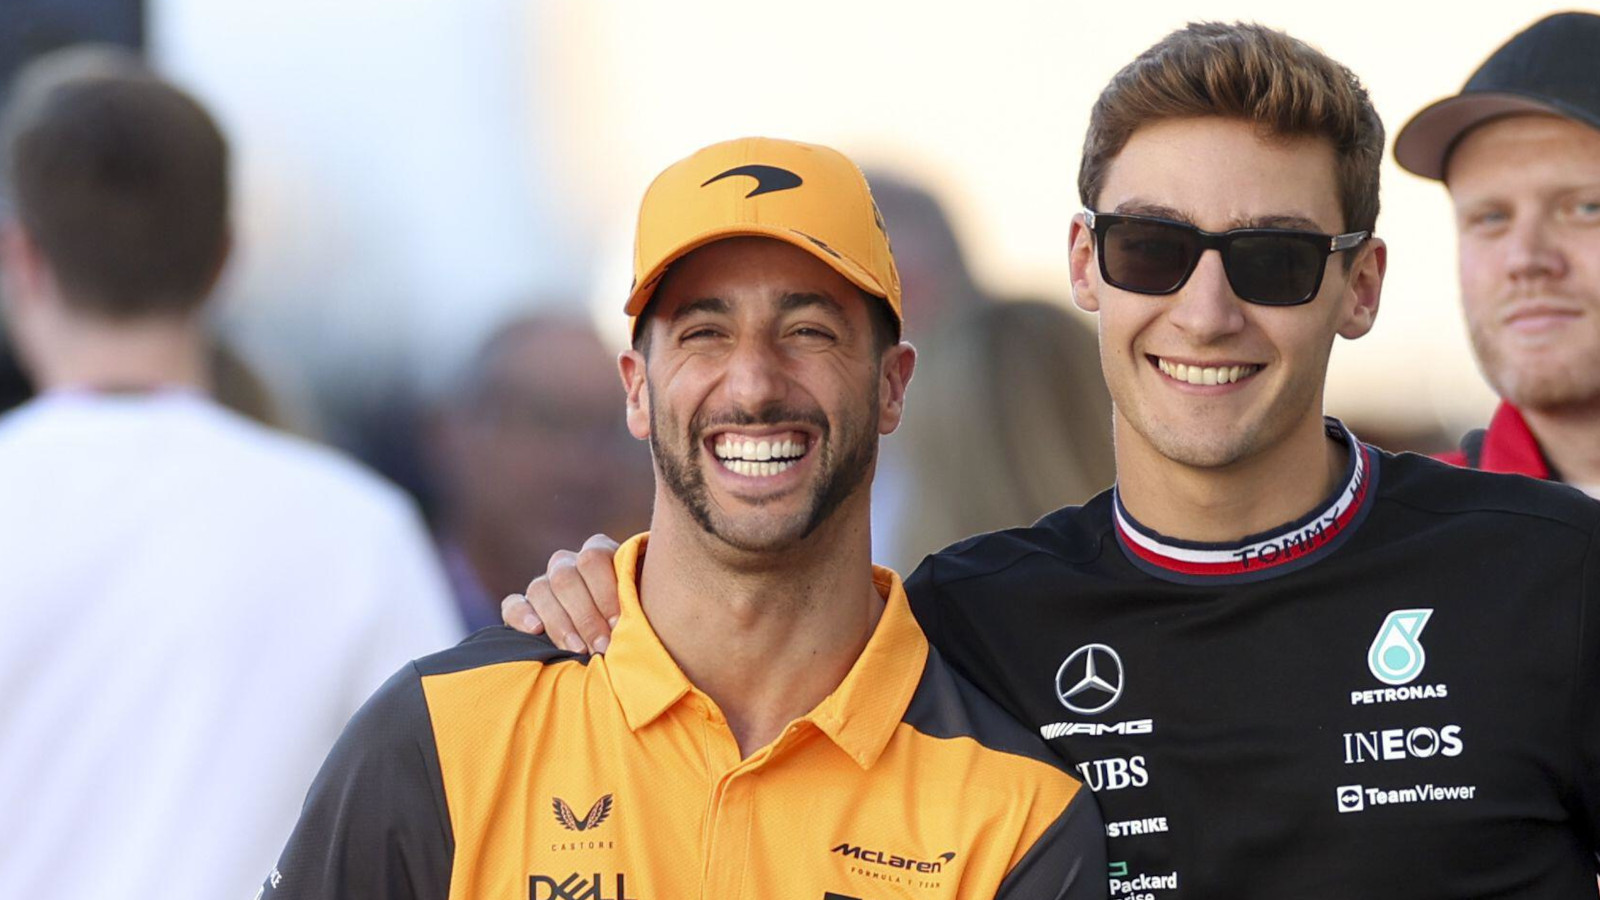 George Russell gives Daniel Ricciardo's shoulder a squeeze. Austin October 2022